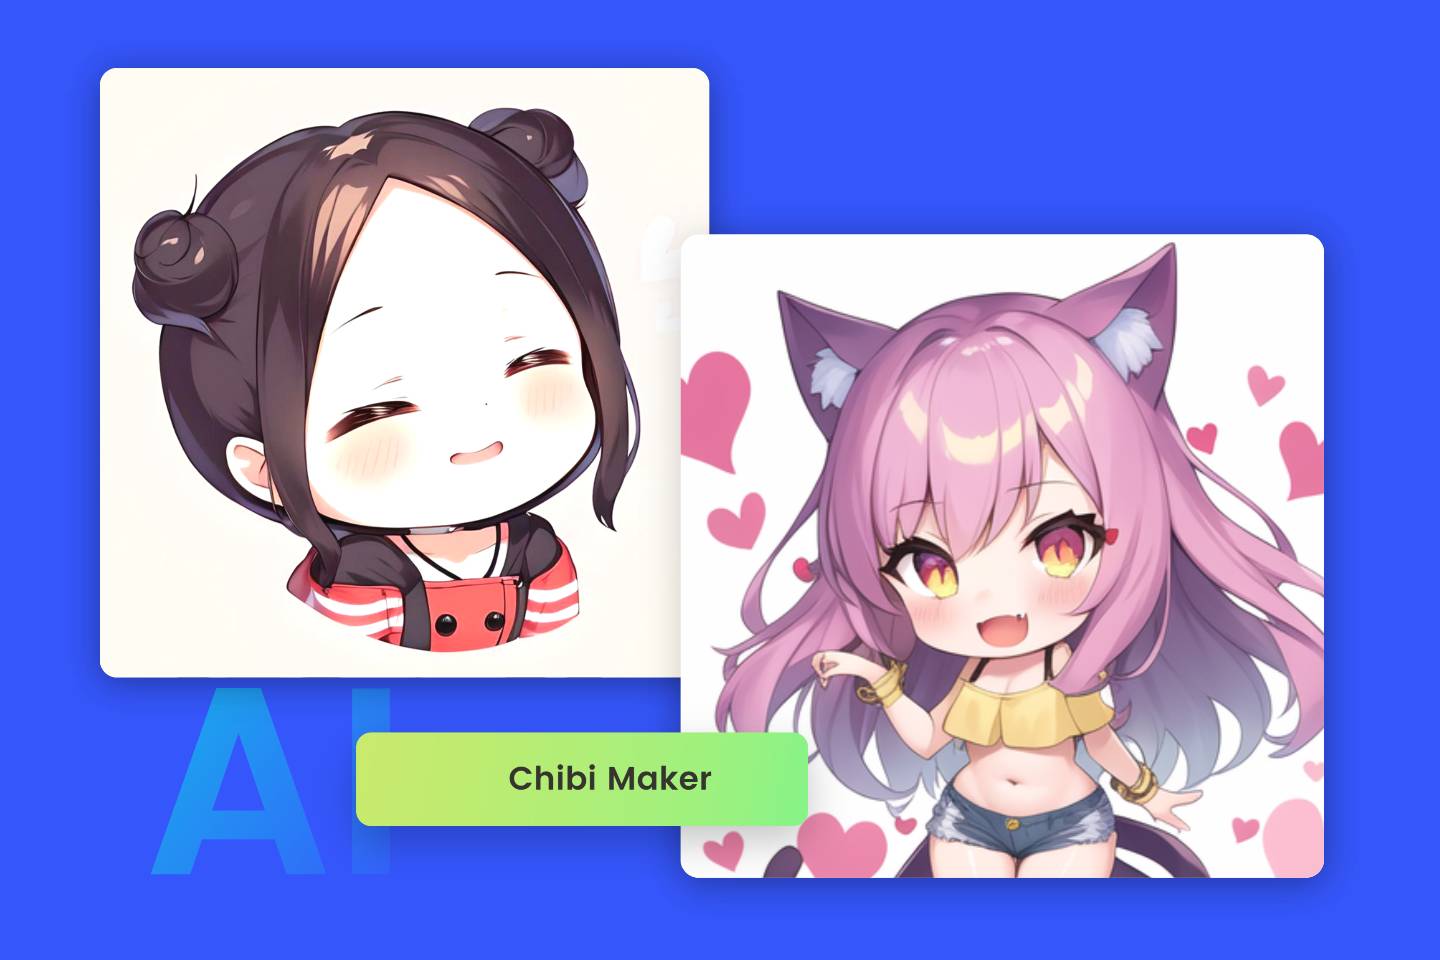 Create your own cute chibi creator with these helpful tools